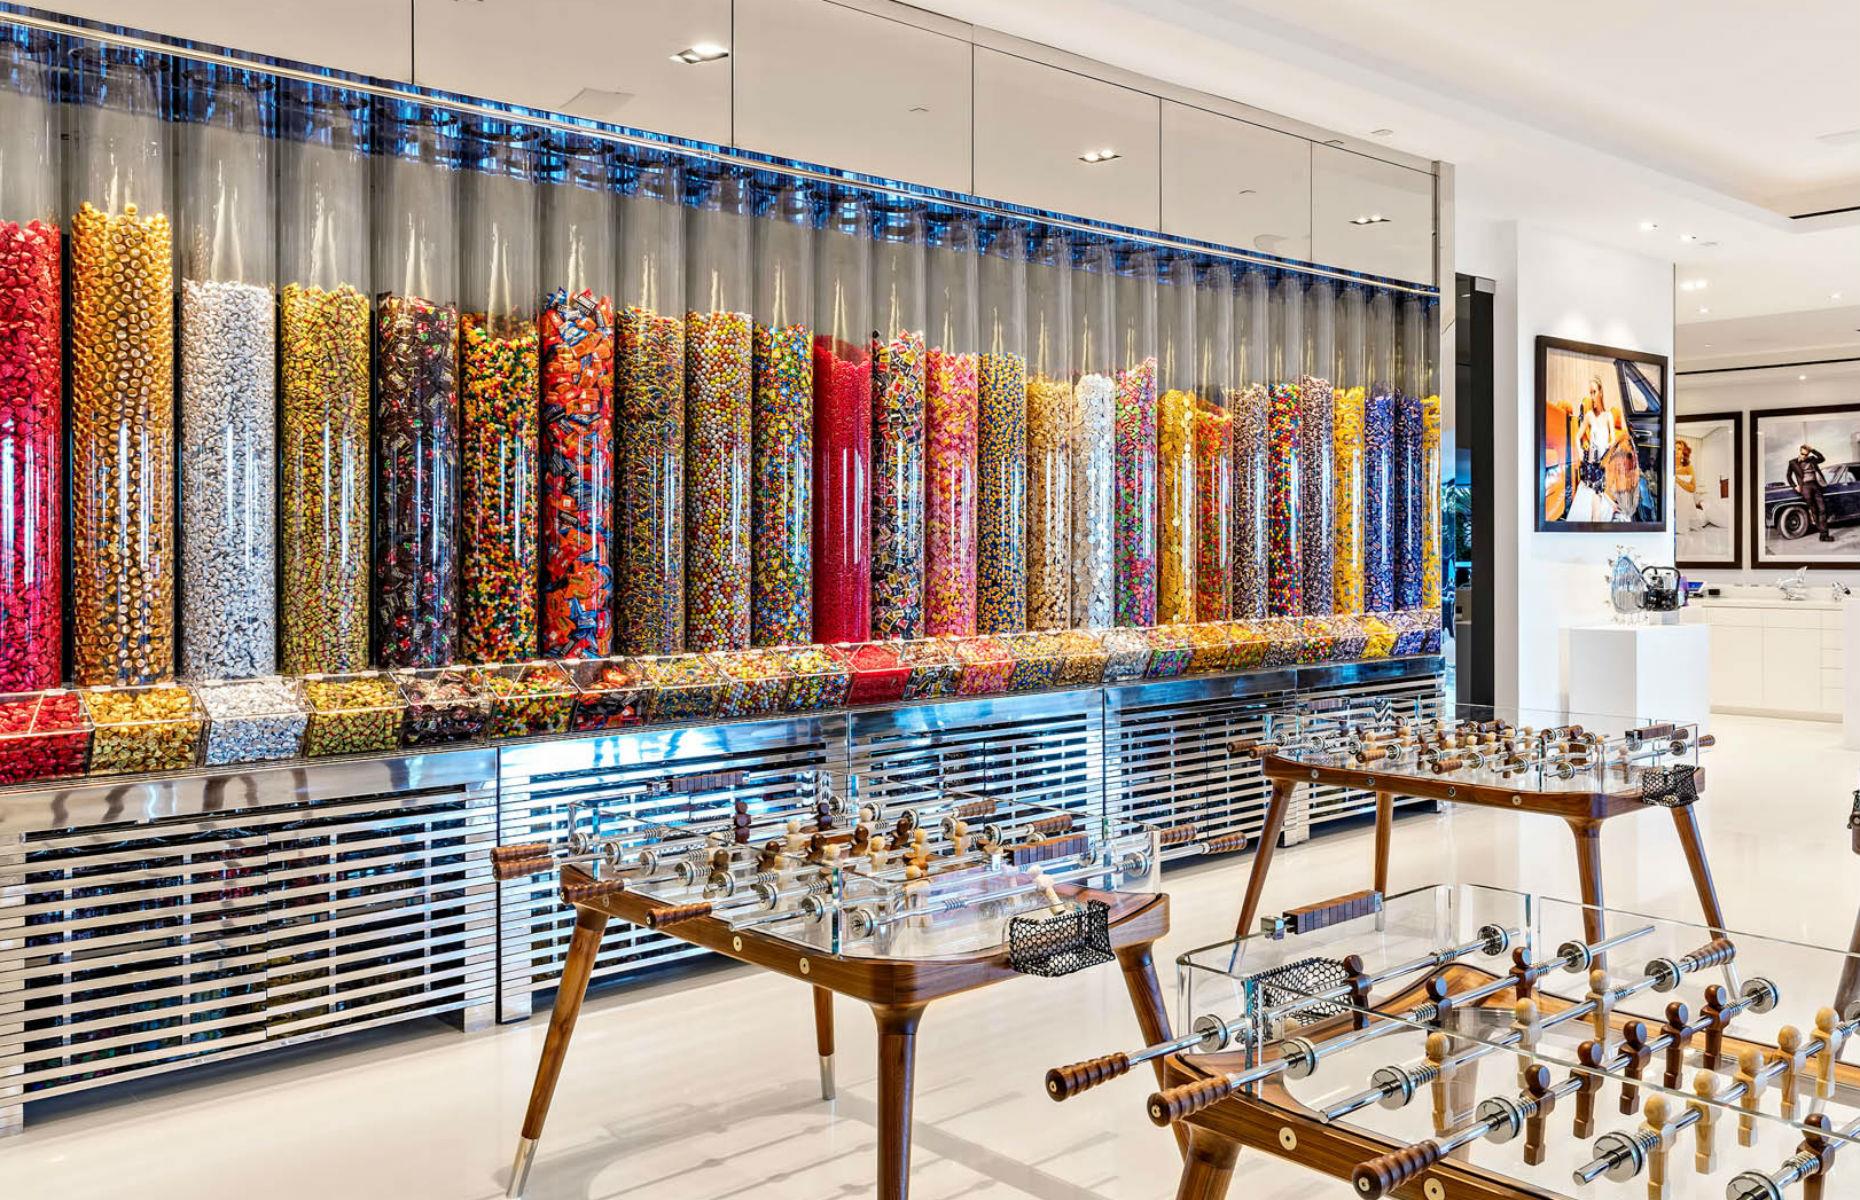 A wall of candy